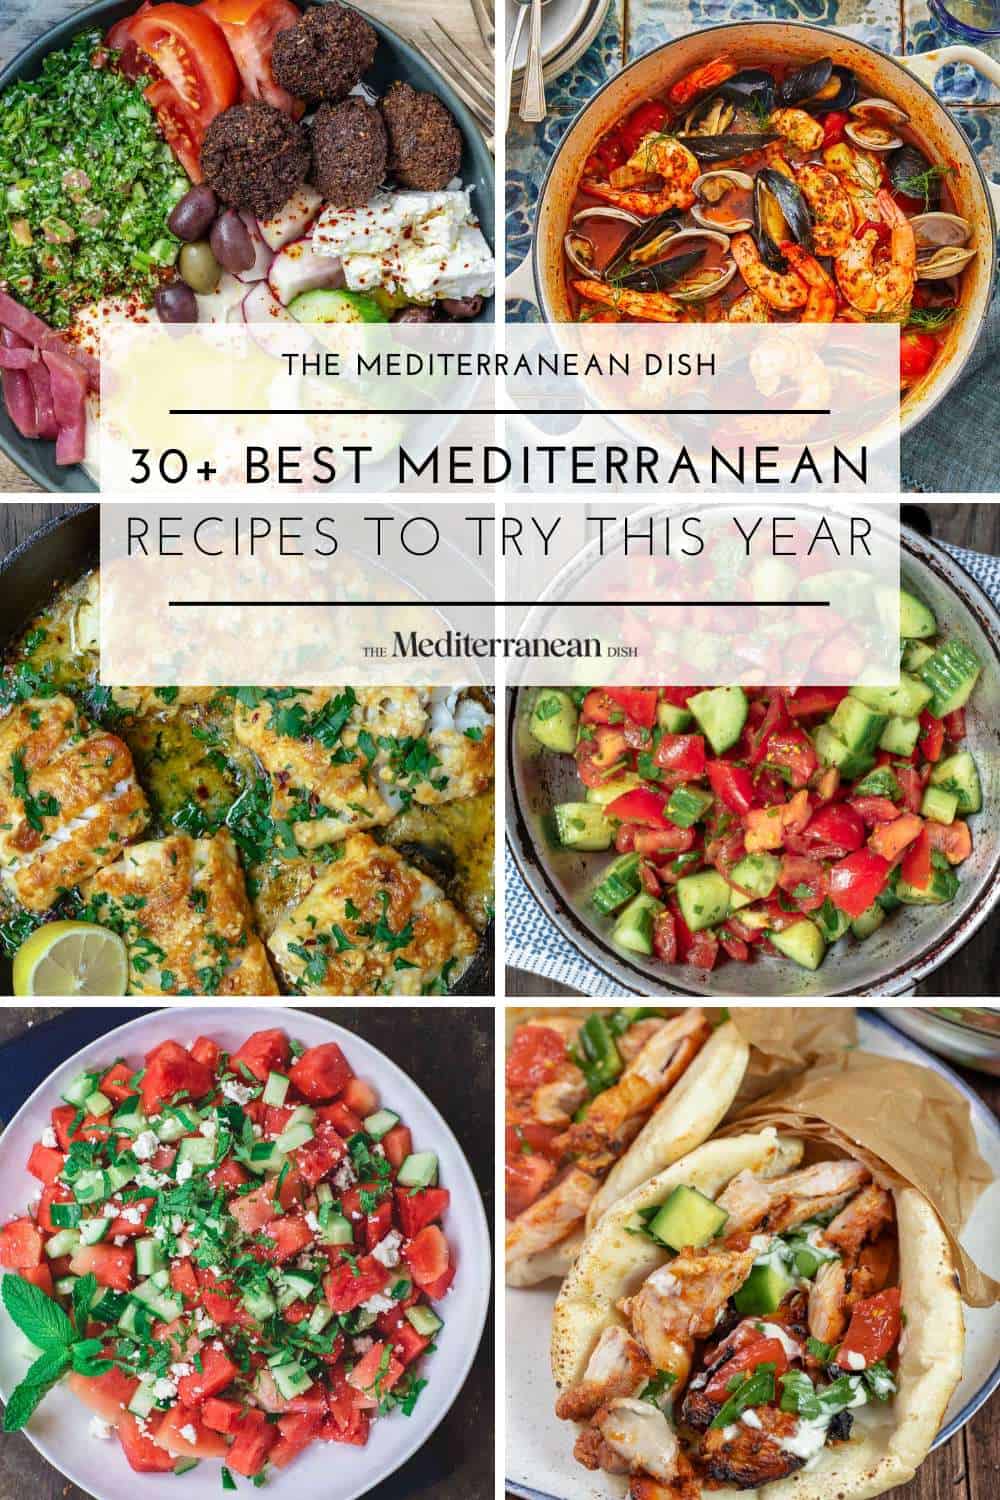 MEDITERRANEAN DIET MEAL IDEAS | Quick Easy and Healthy Recipes | Seasonal Spring Meal Prep